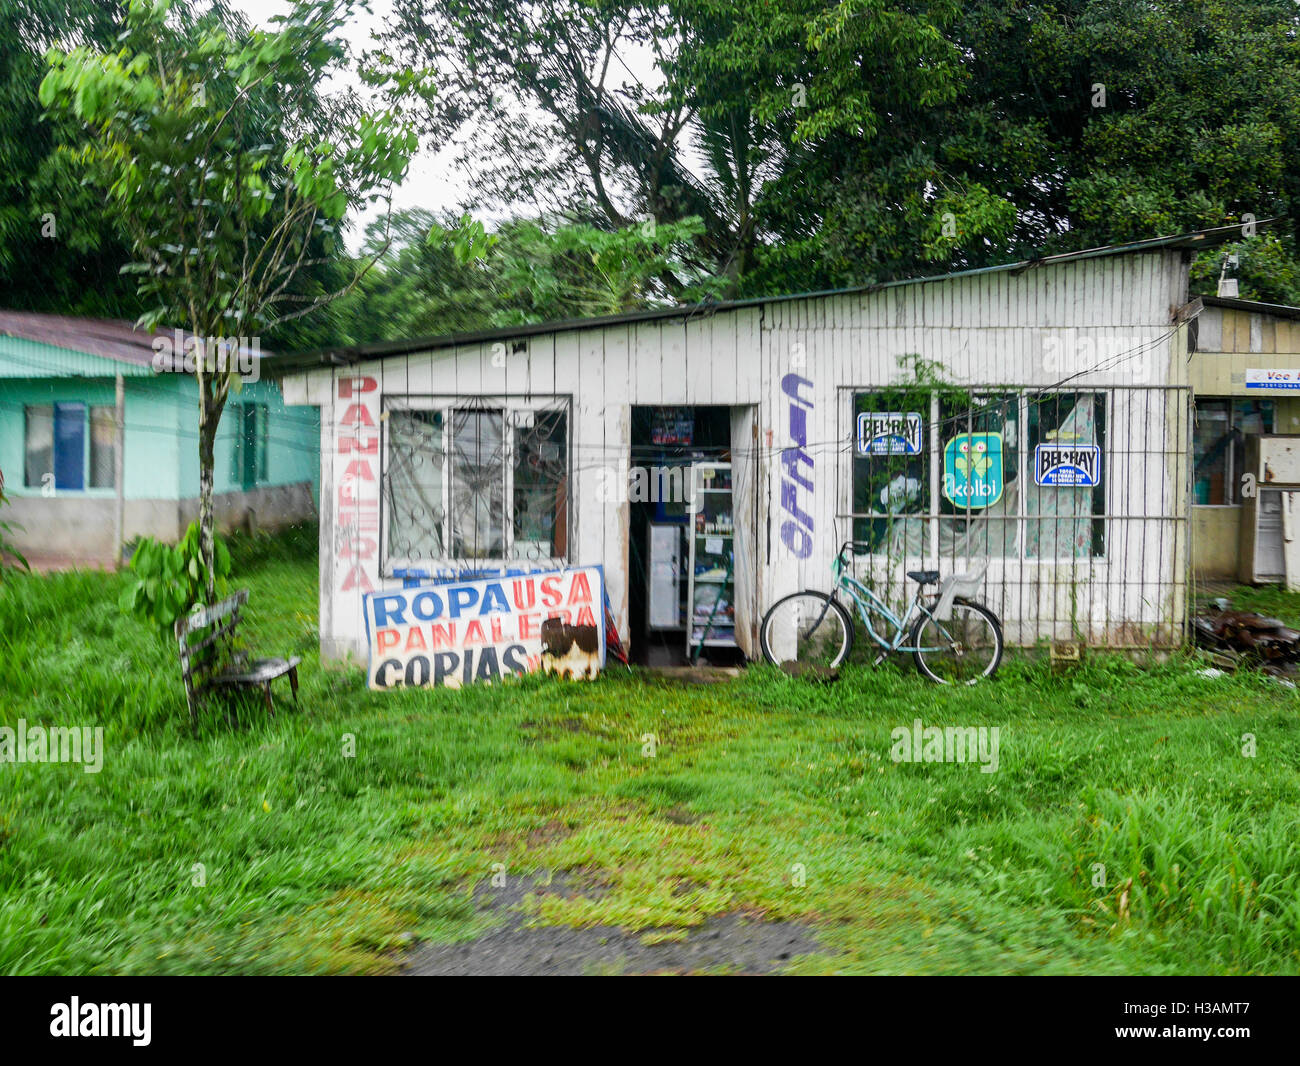 Very tiny store in a village in central America in a building that looks abandoned, wooden white structure a main food source for people Stock Photo